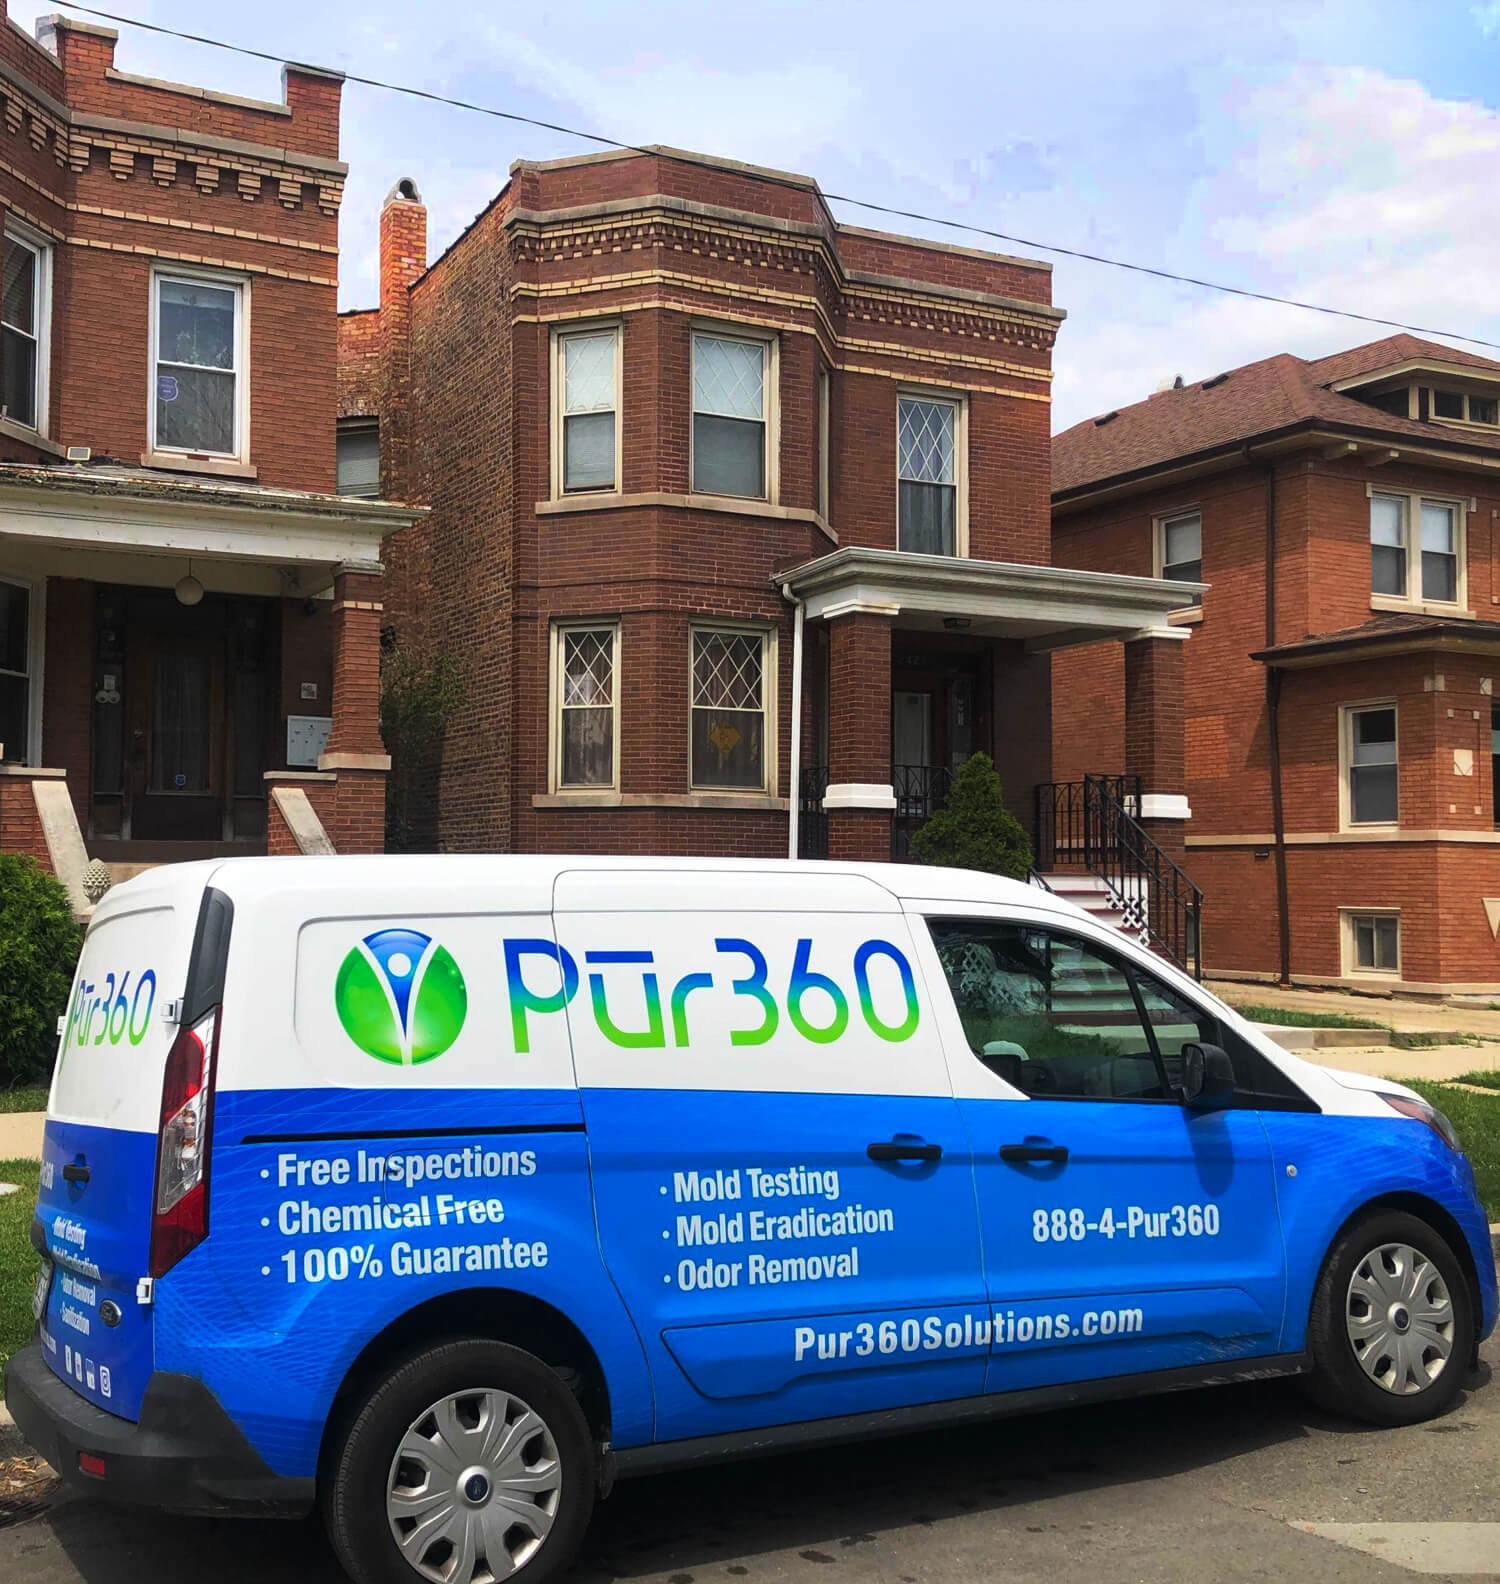 Pur360 van parked on the street outside a home